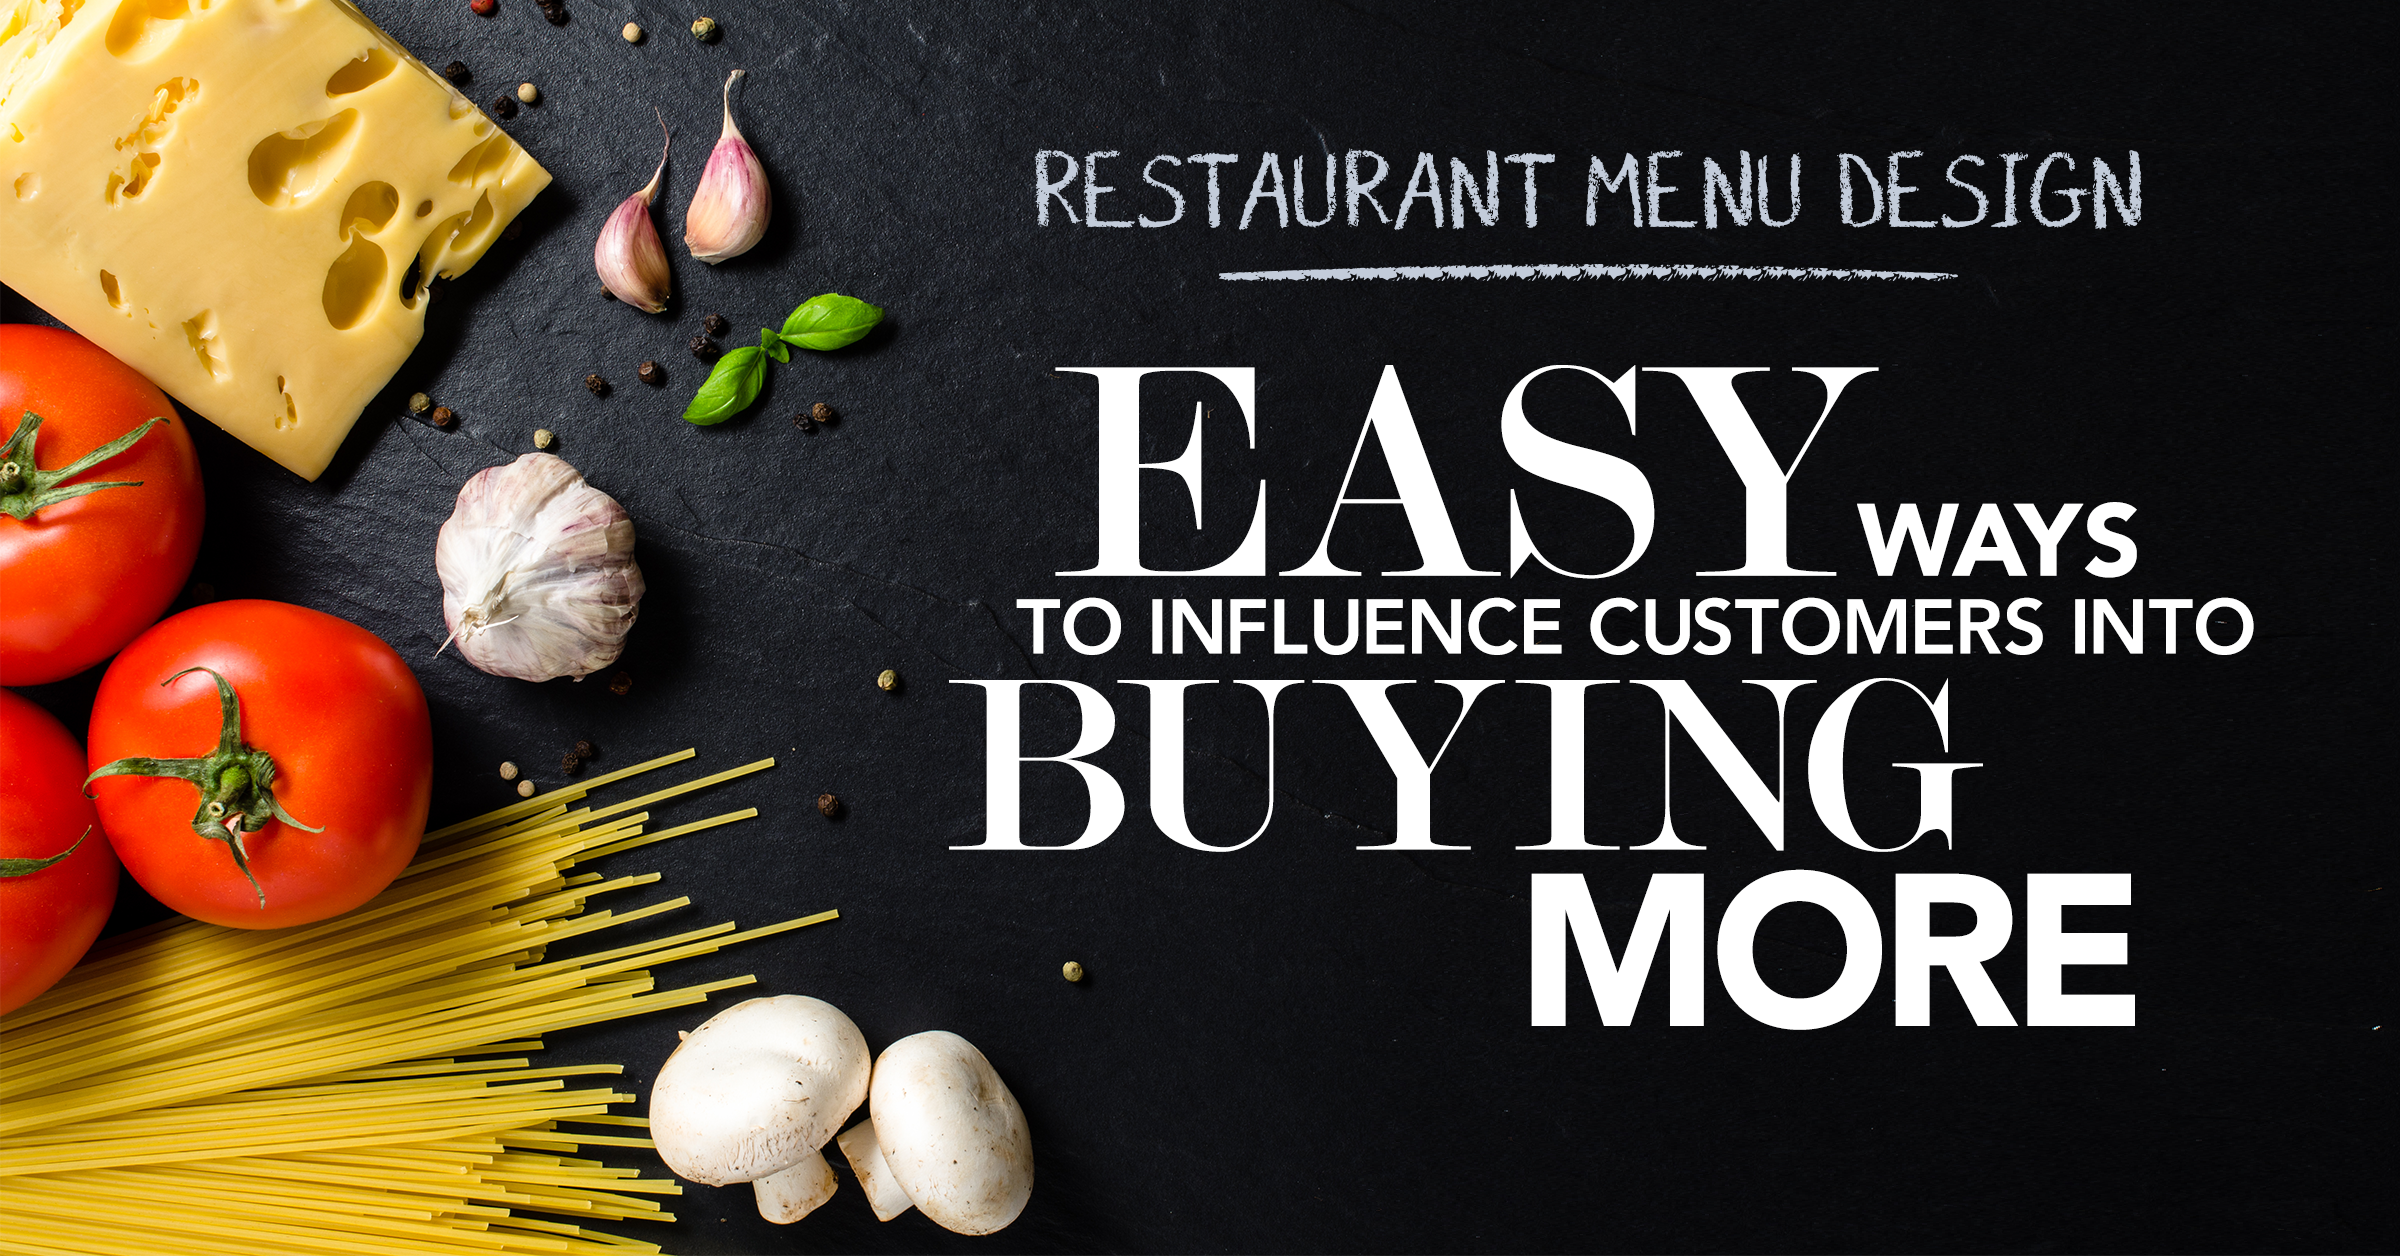 Restaurant Menu Design: Easy Ways to Influence Customers Into Buying More